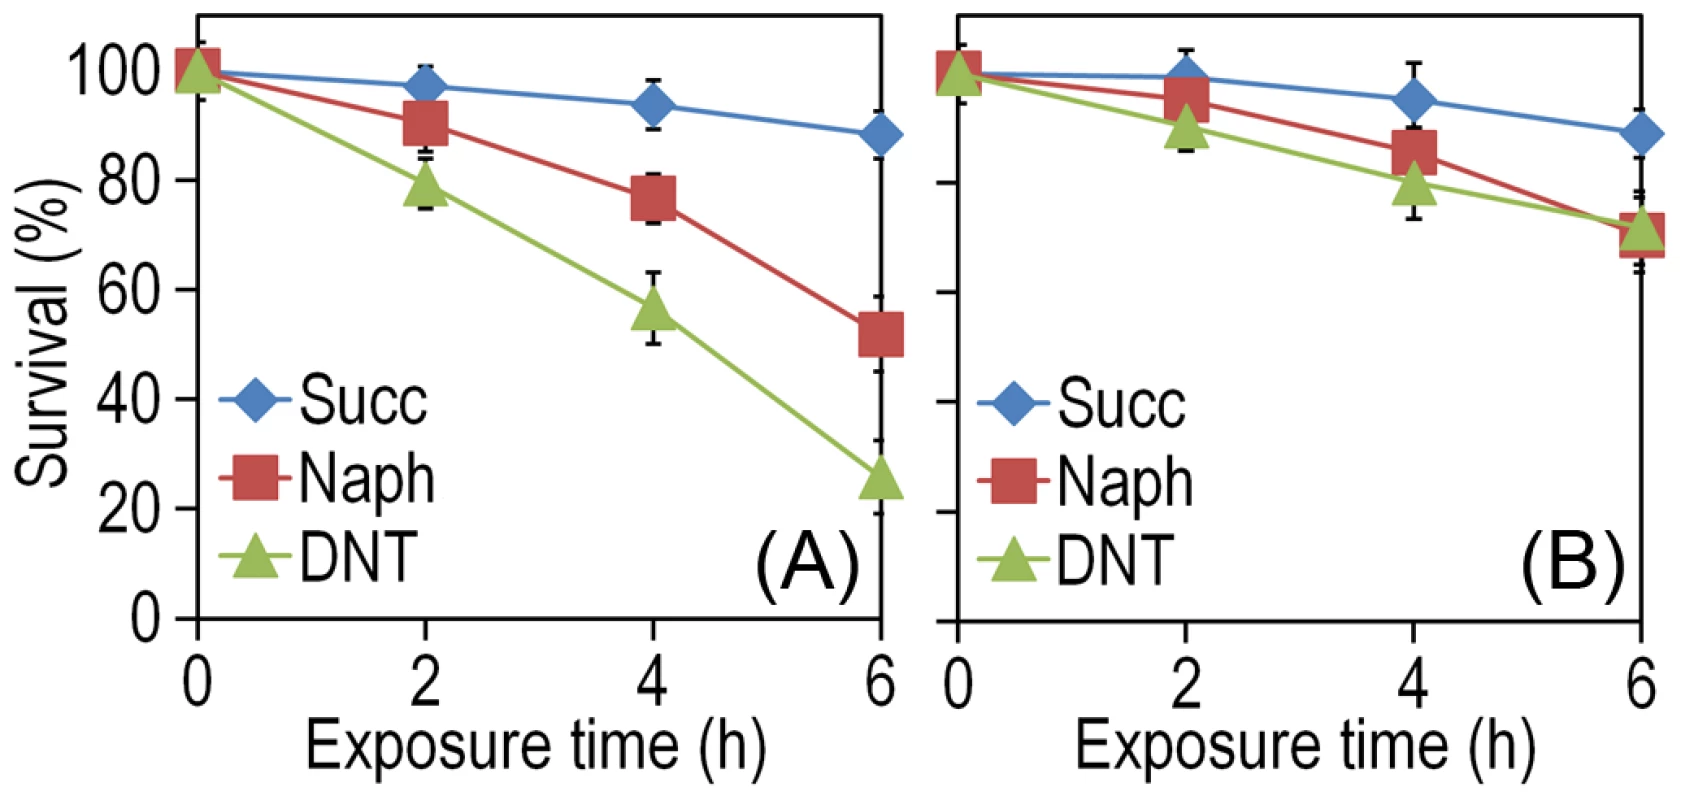 Effect of DNT and naphthalene addition on <i>Burkholderia</i> sp. DNT viability.